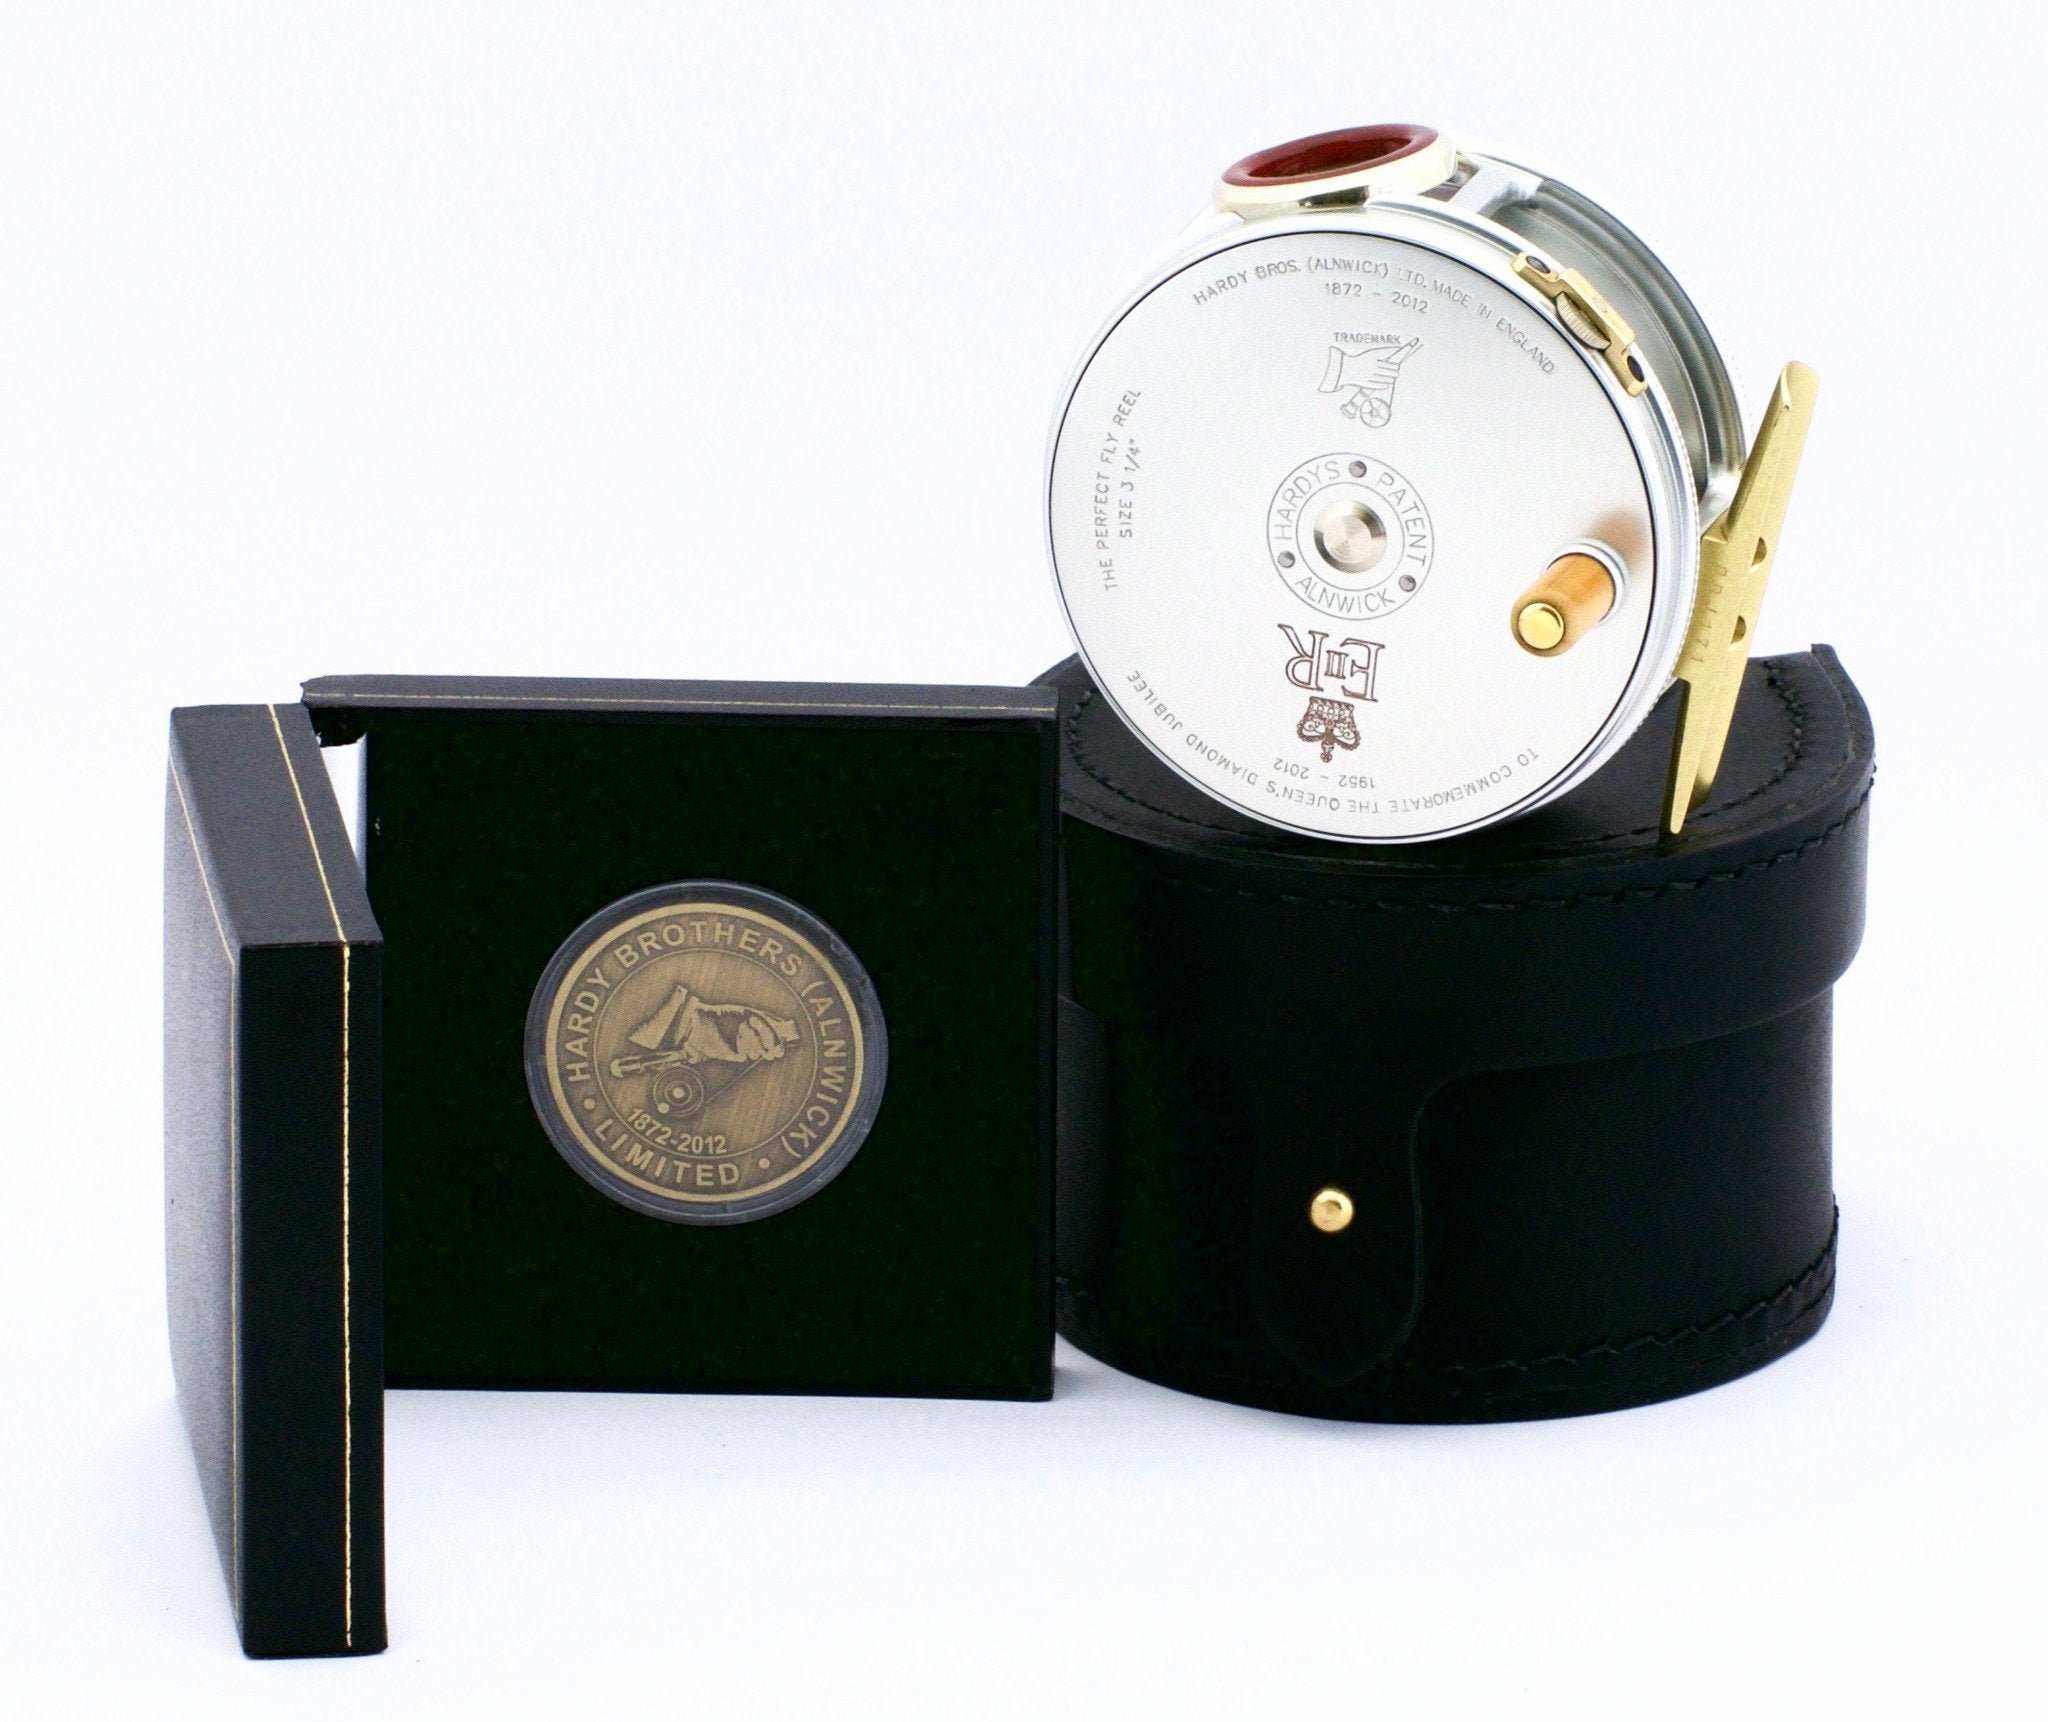 HARDY ROYAL COMMEMORATIVE PERFECT REEL SET. LHW. Limited Edition. One of  250 Sets. Each set consists of two reels: The 3 in. Queen's Reel, and the 4